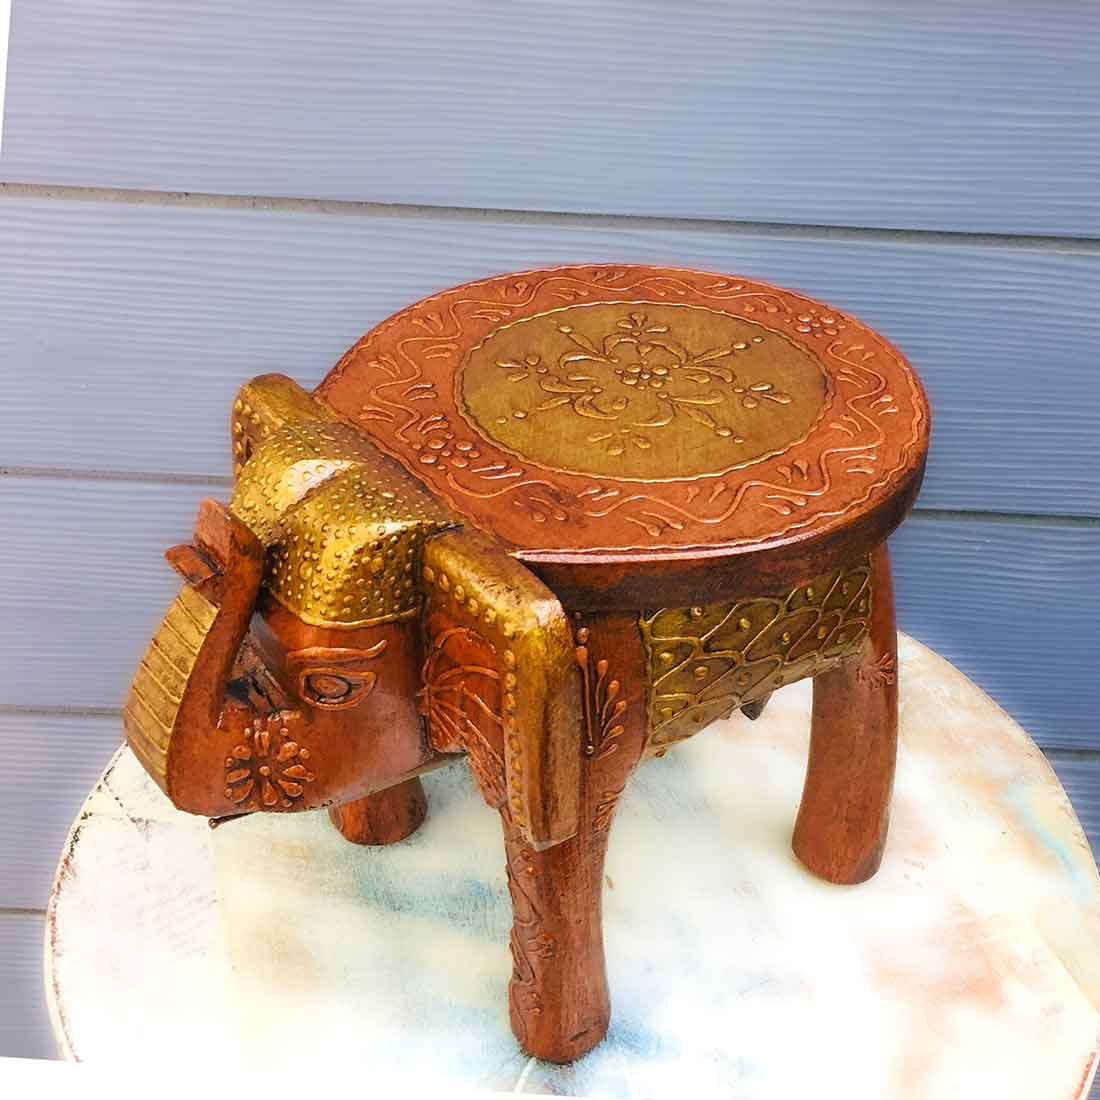 Elephant Stool 8 Inch | Copper Showpiece for Table Decor and Gifts - ApkaMart